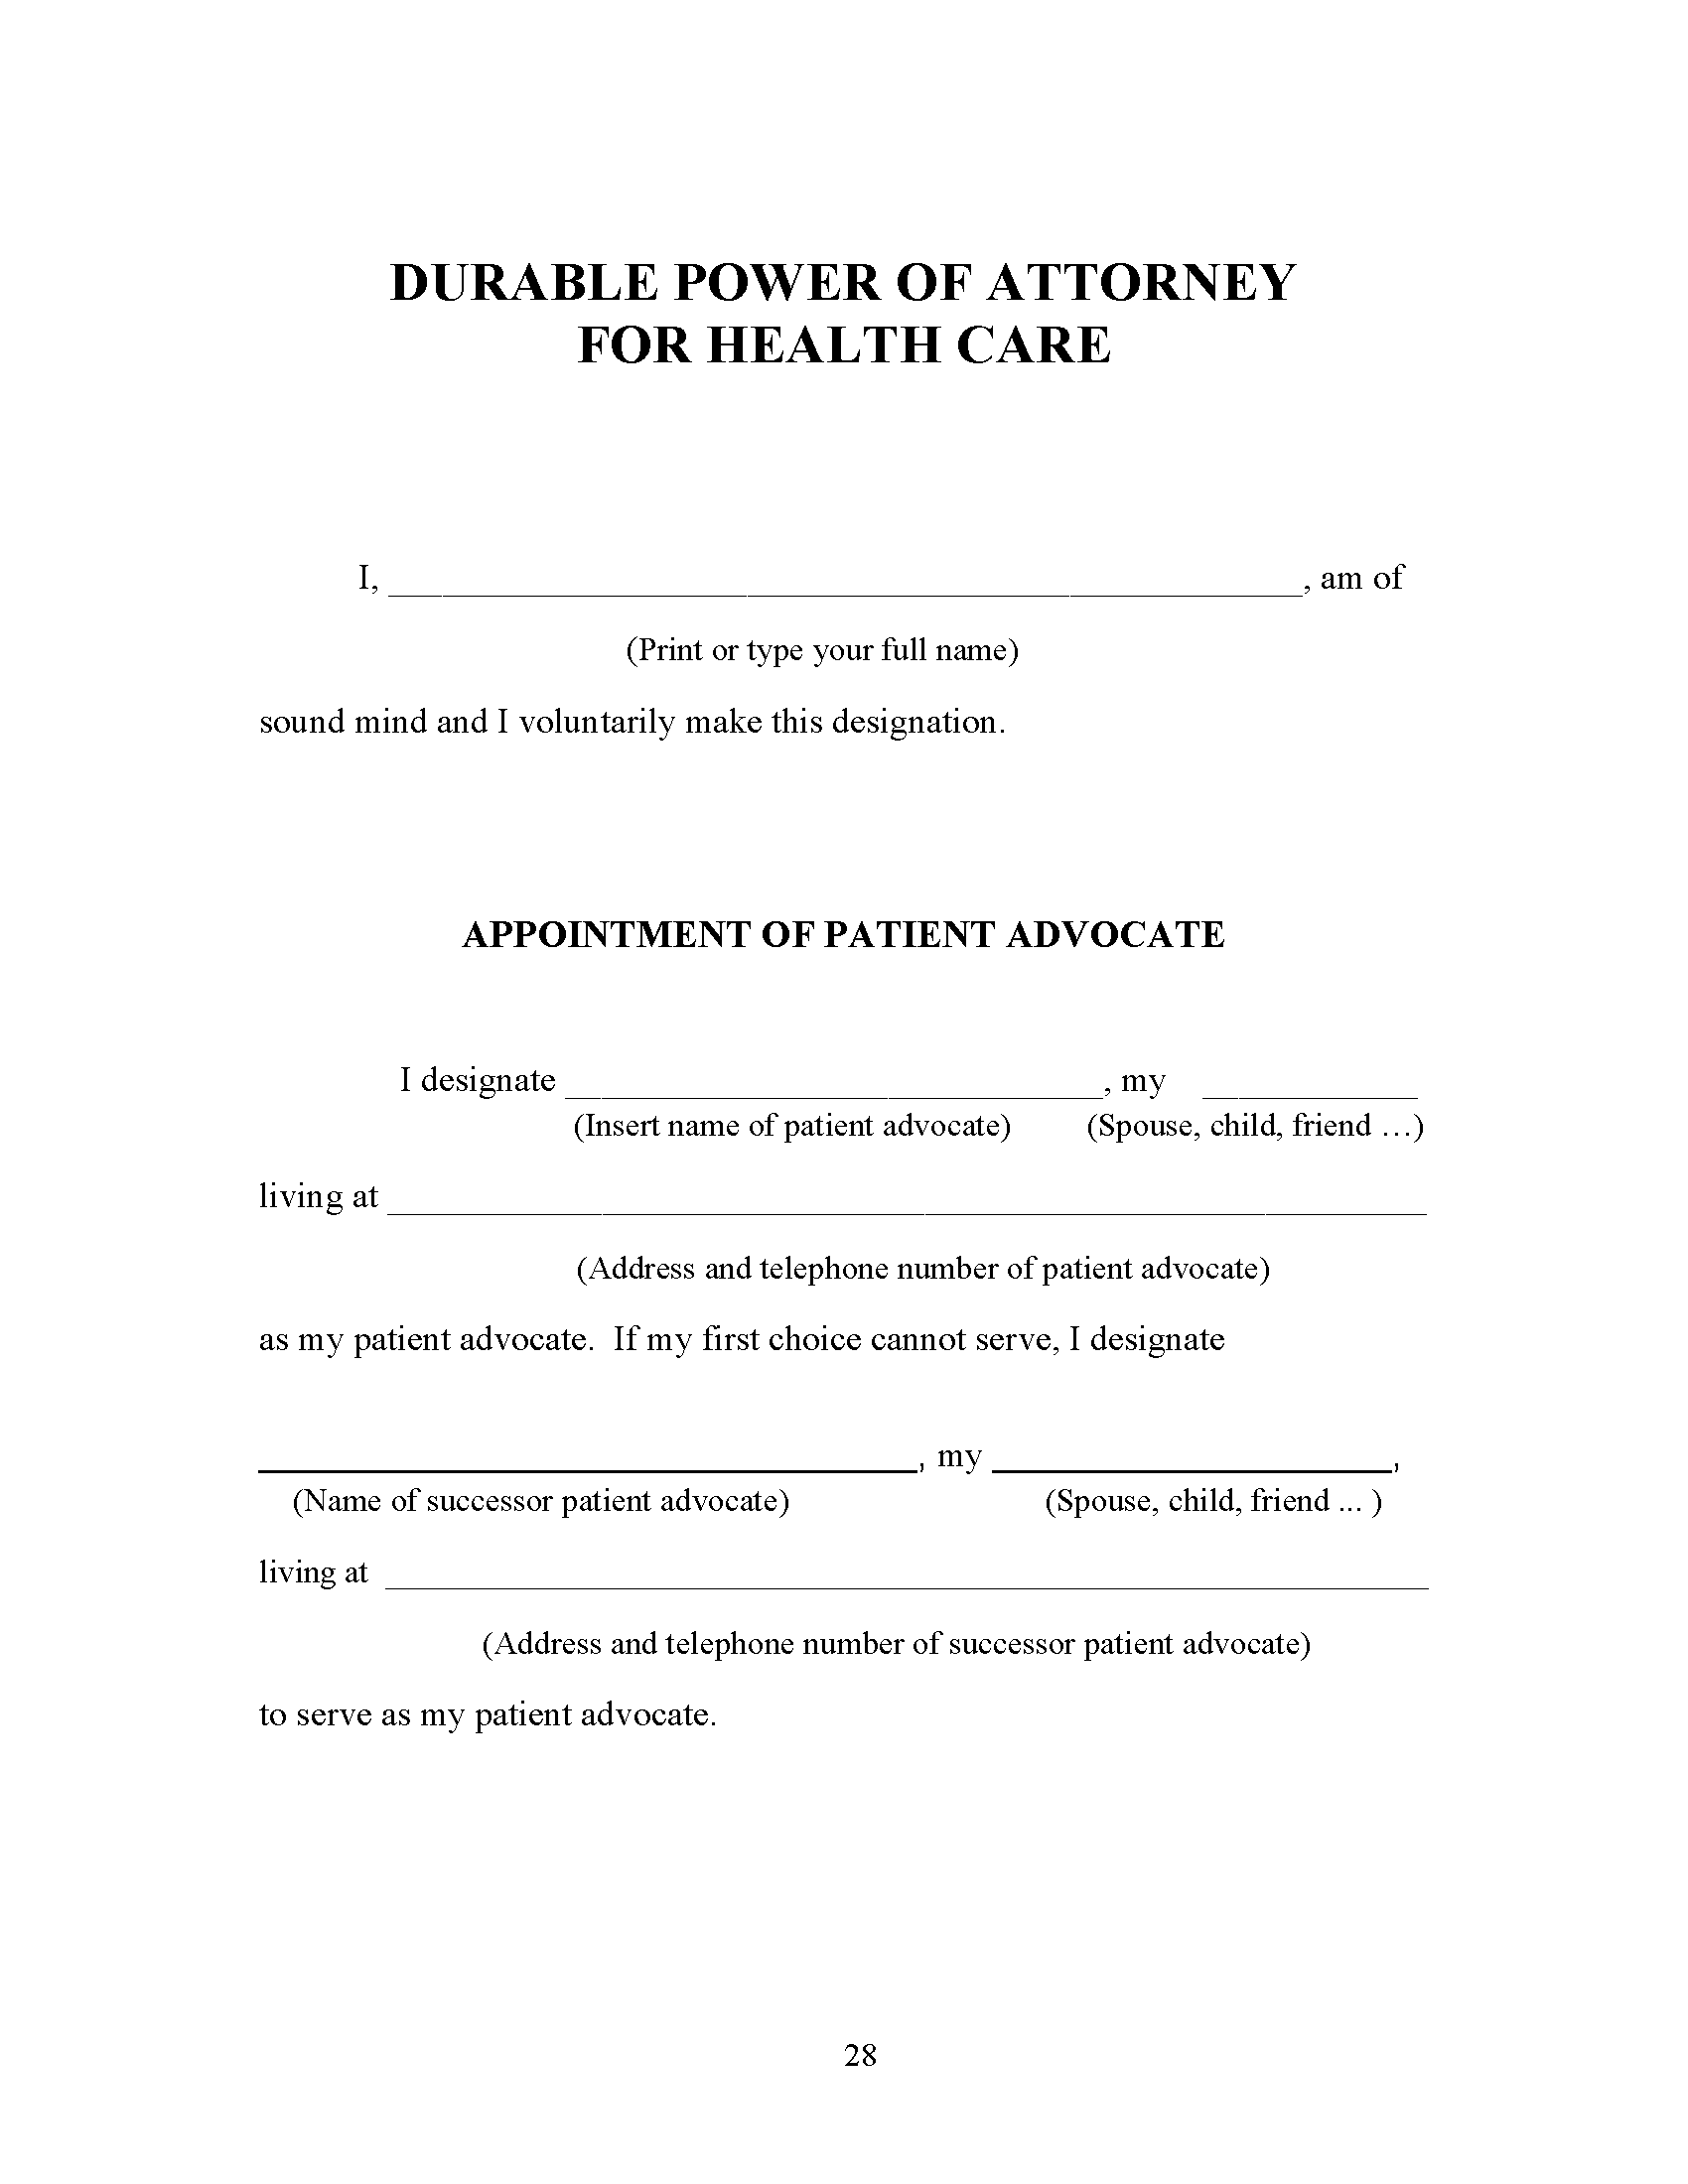 michigan-health-care-power-of-attorney-fillable-pdf-free-printable